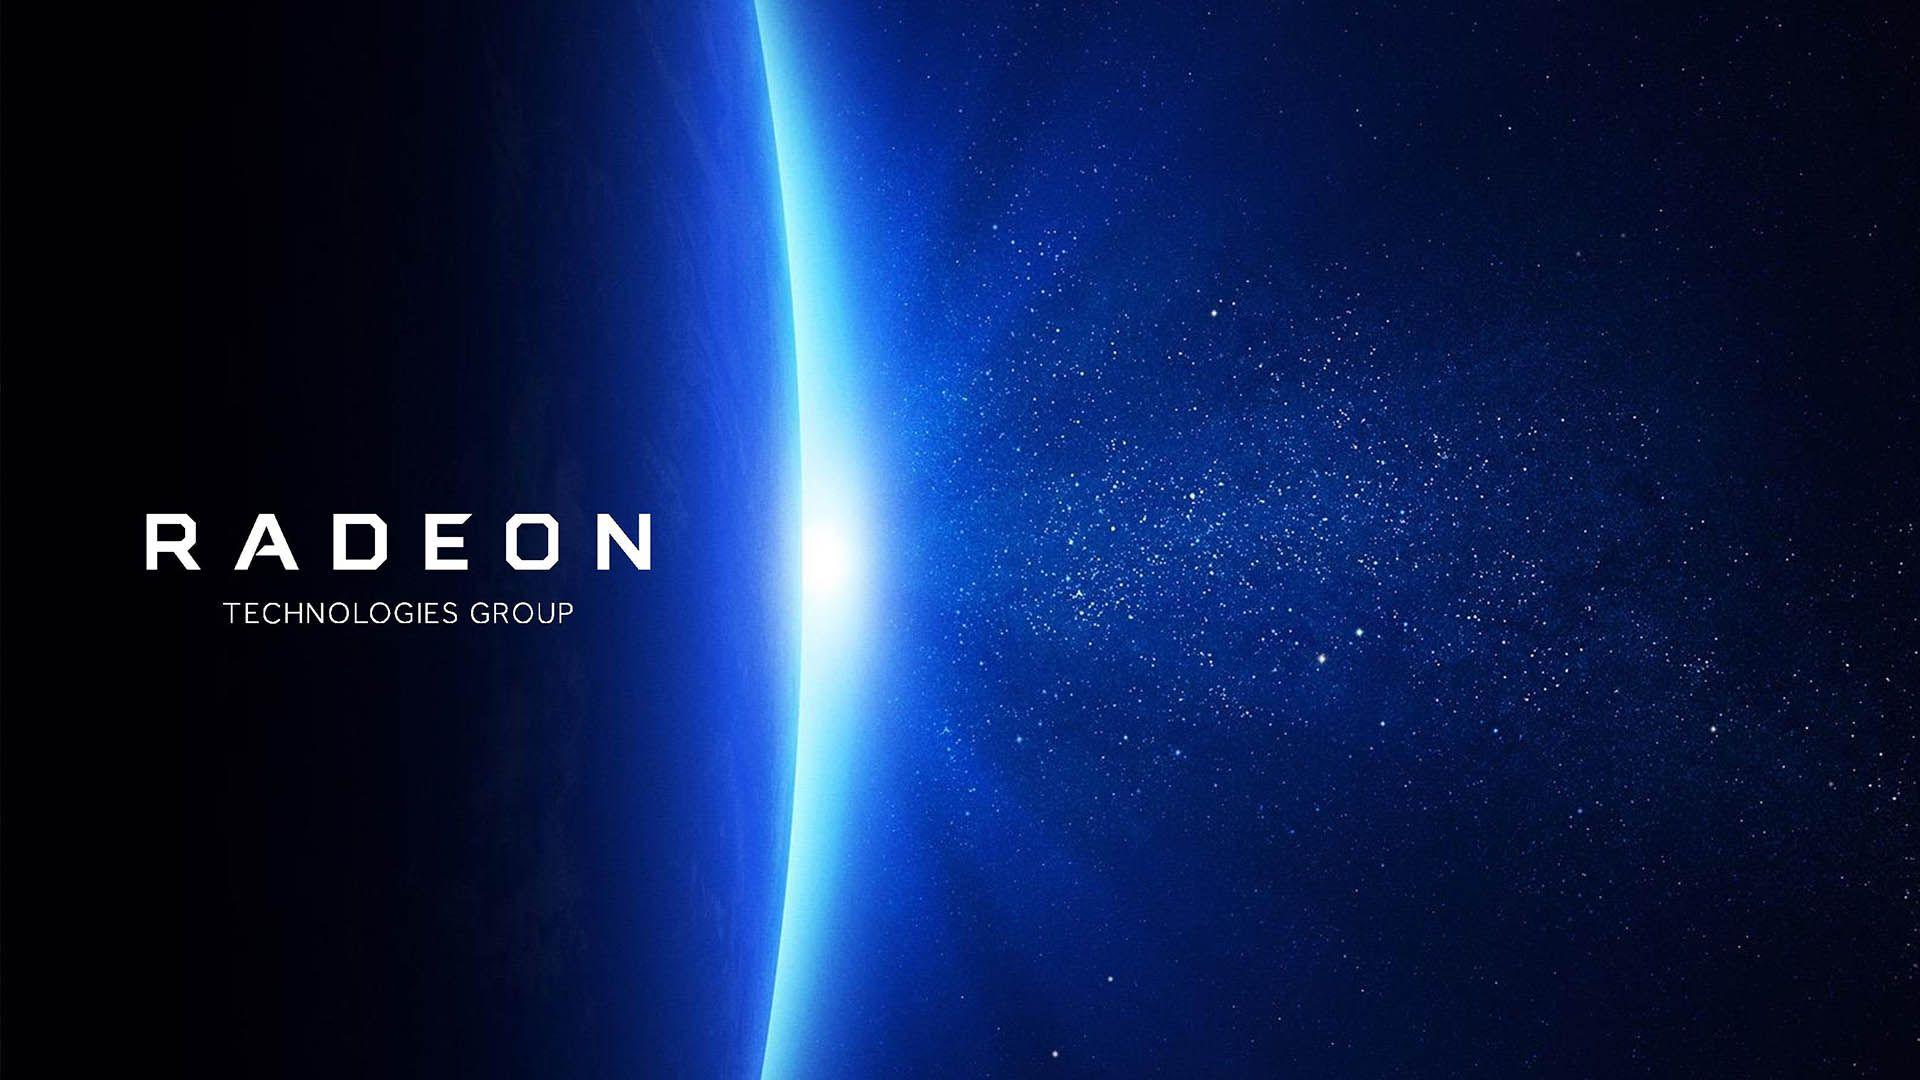 AMD Radeon RX 500 Series Confirmed To Feature Vega 10 and Vega 11